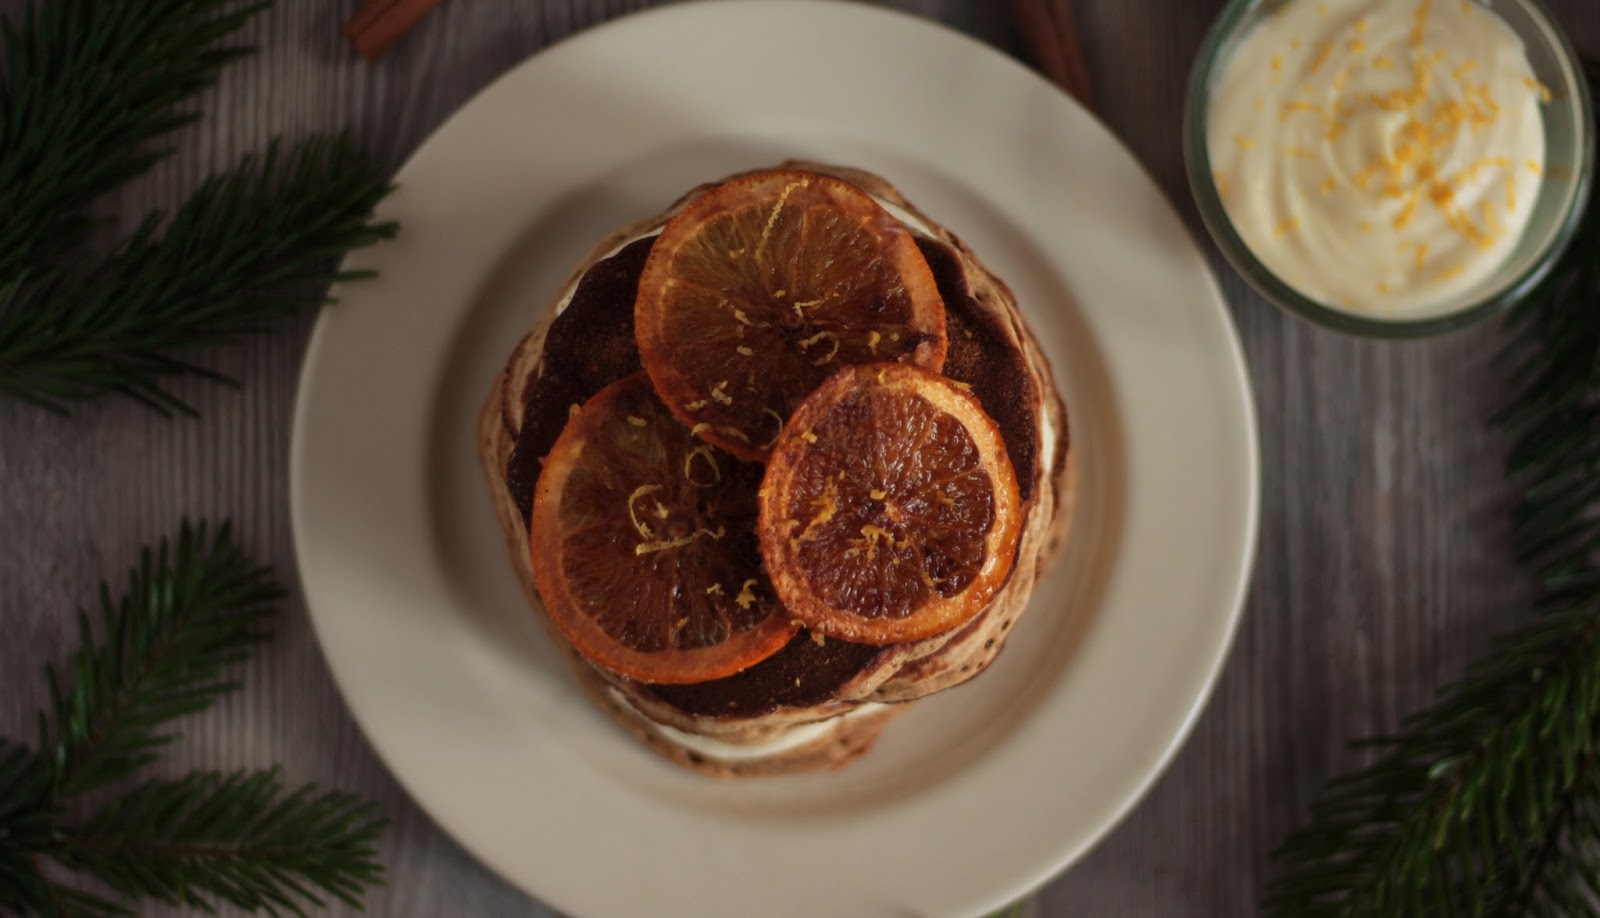 Christmas Orange and Cinnamon Pancakes with White Chocolate Yoghurt Cream and Lemon Zest - recipe brought to you by Pancake Stories.